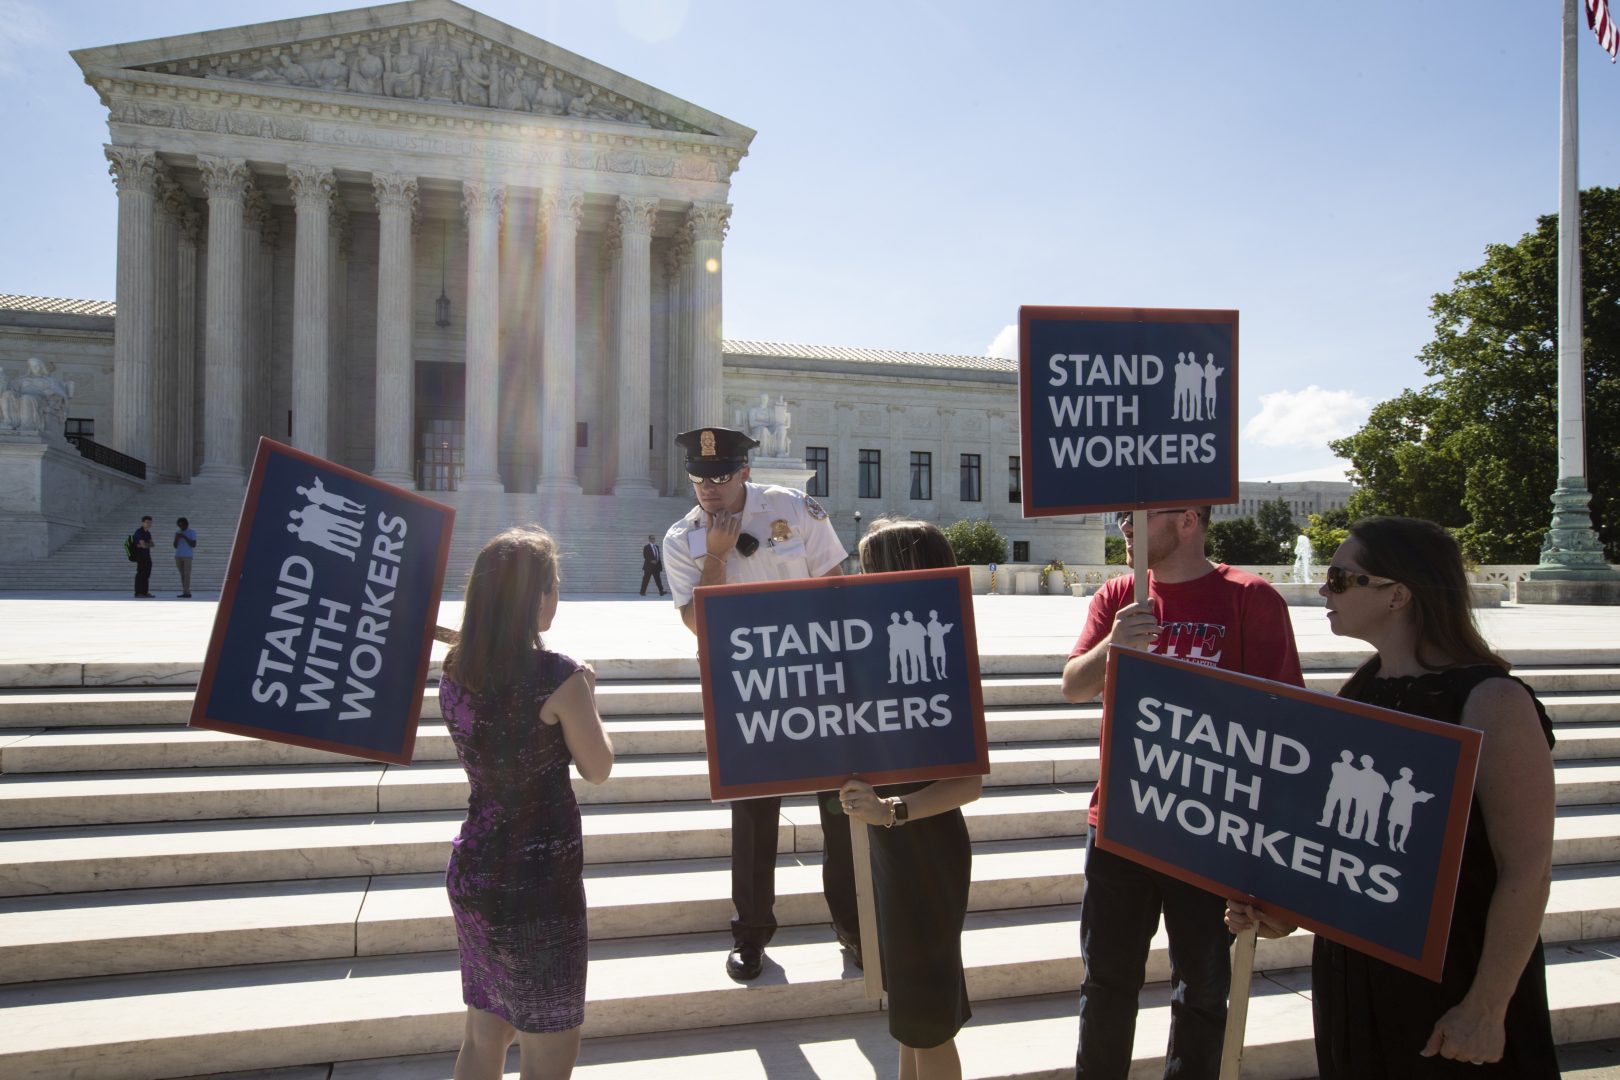 People gather at the Supreme Court awaiting a decision in an Illinois union dues case, Janus vs. AFSCME, in Washington, Monday, June 25, 2018. The outcome of that case and several others were not announced Monday as the court's term comes to a close. (AP Photo/J. Scott Applewhite)